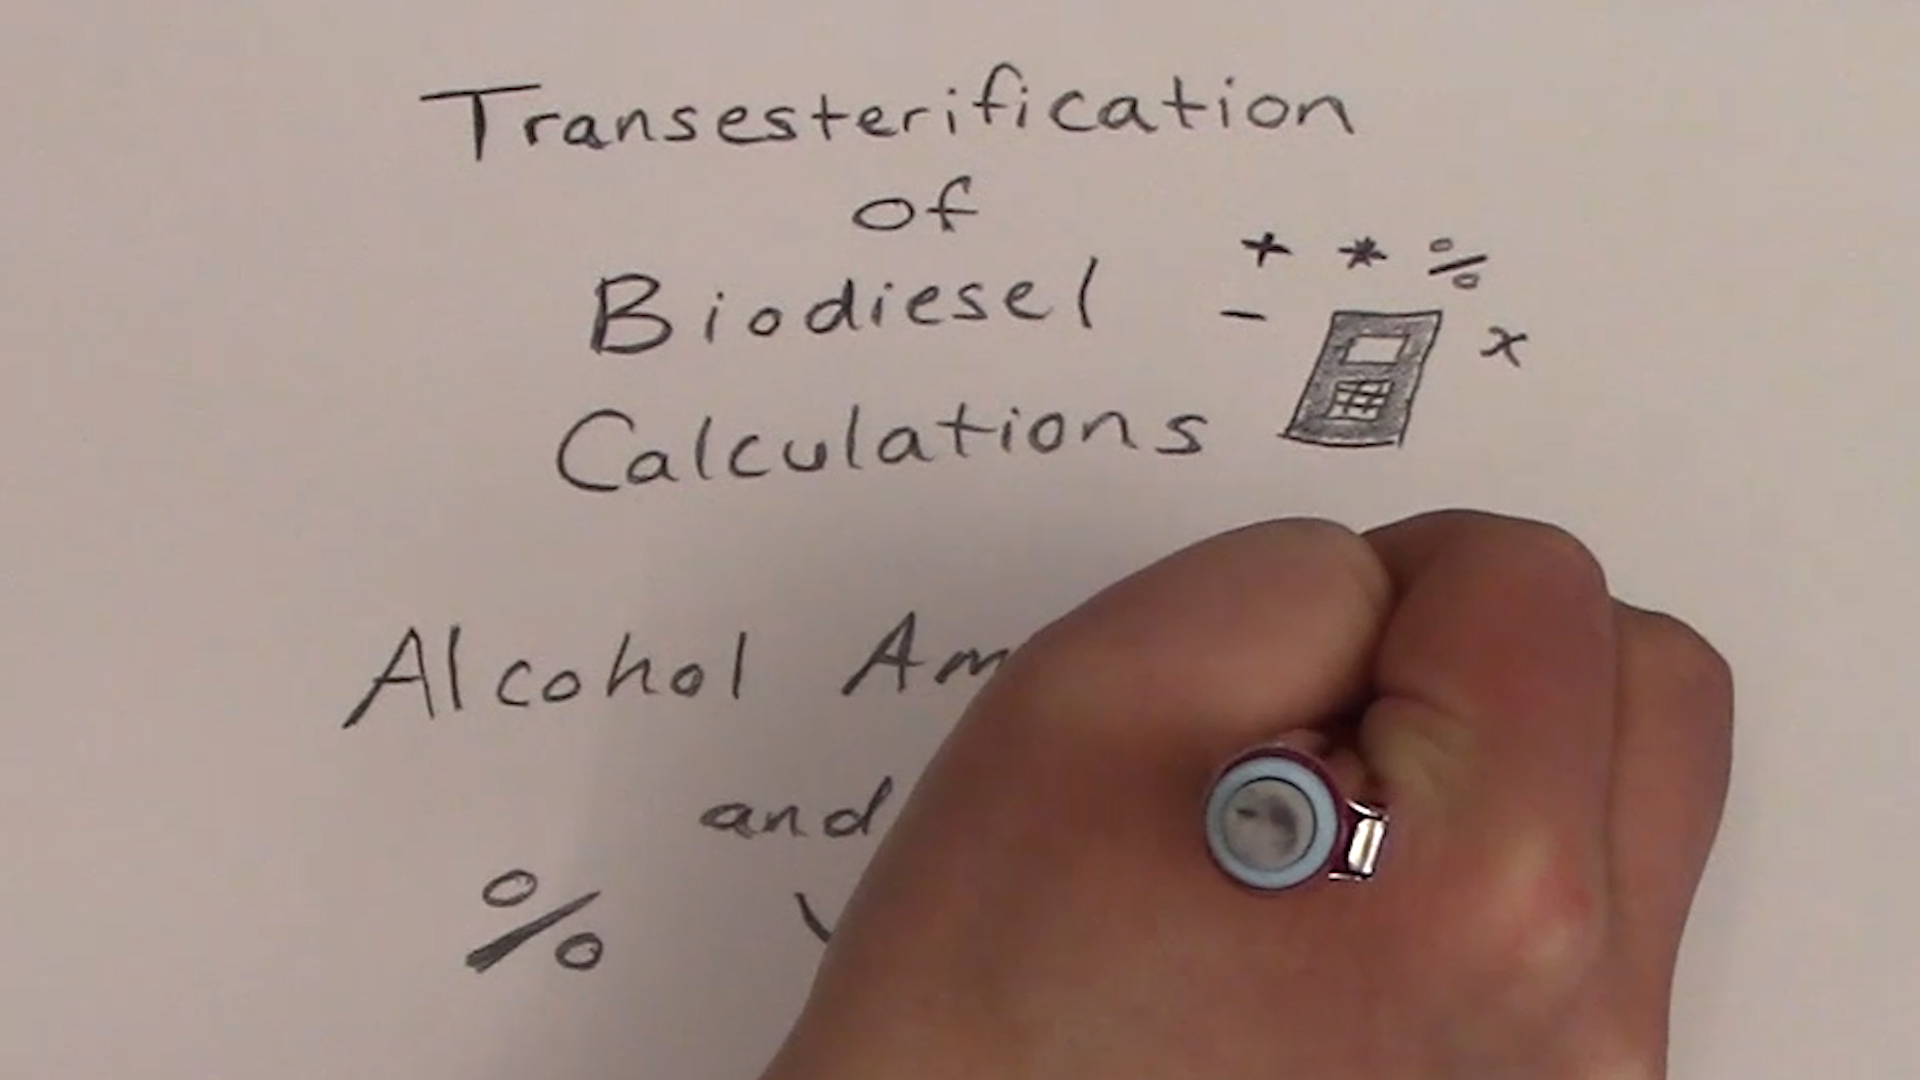 Transesterification of Biodiesel Calculations: Methanol, Ethanol Amounts and % Yield